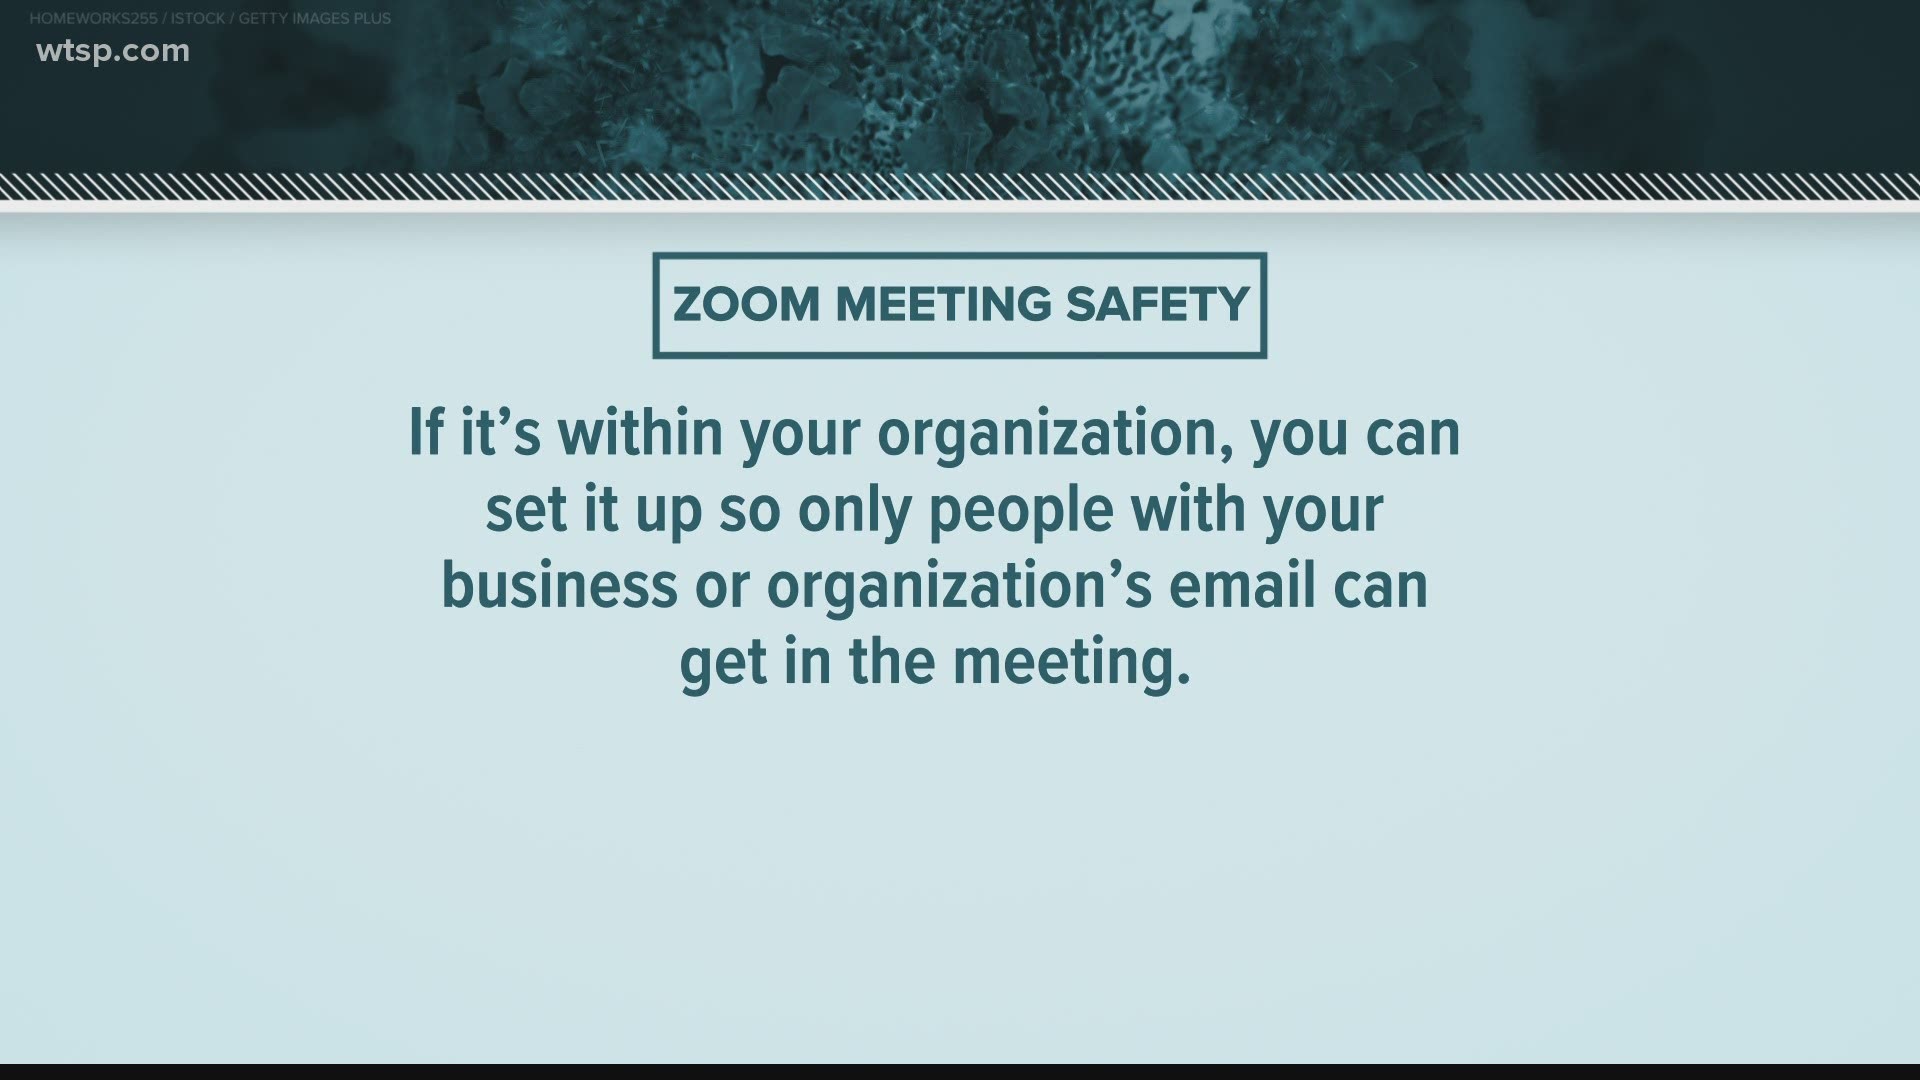 The company's video conferencing software became popular when many companies shifted to working from home at the start of the COVID-19 pandemic.